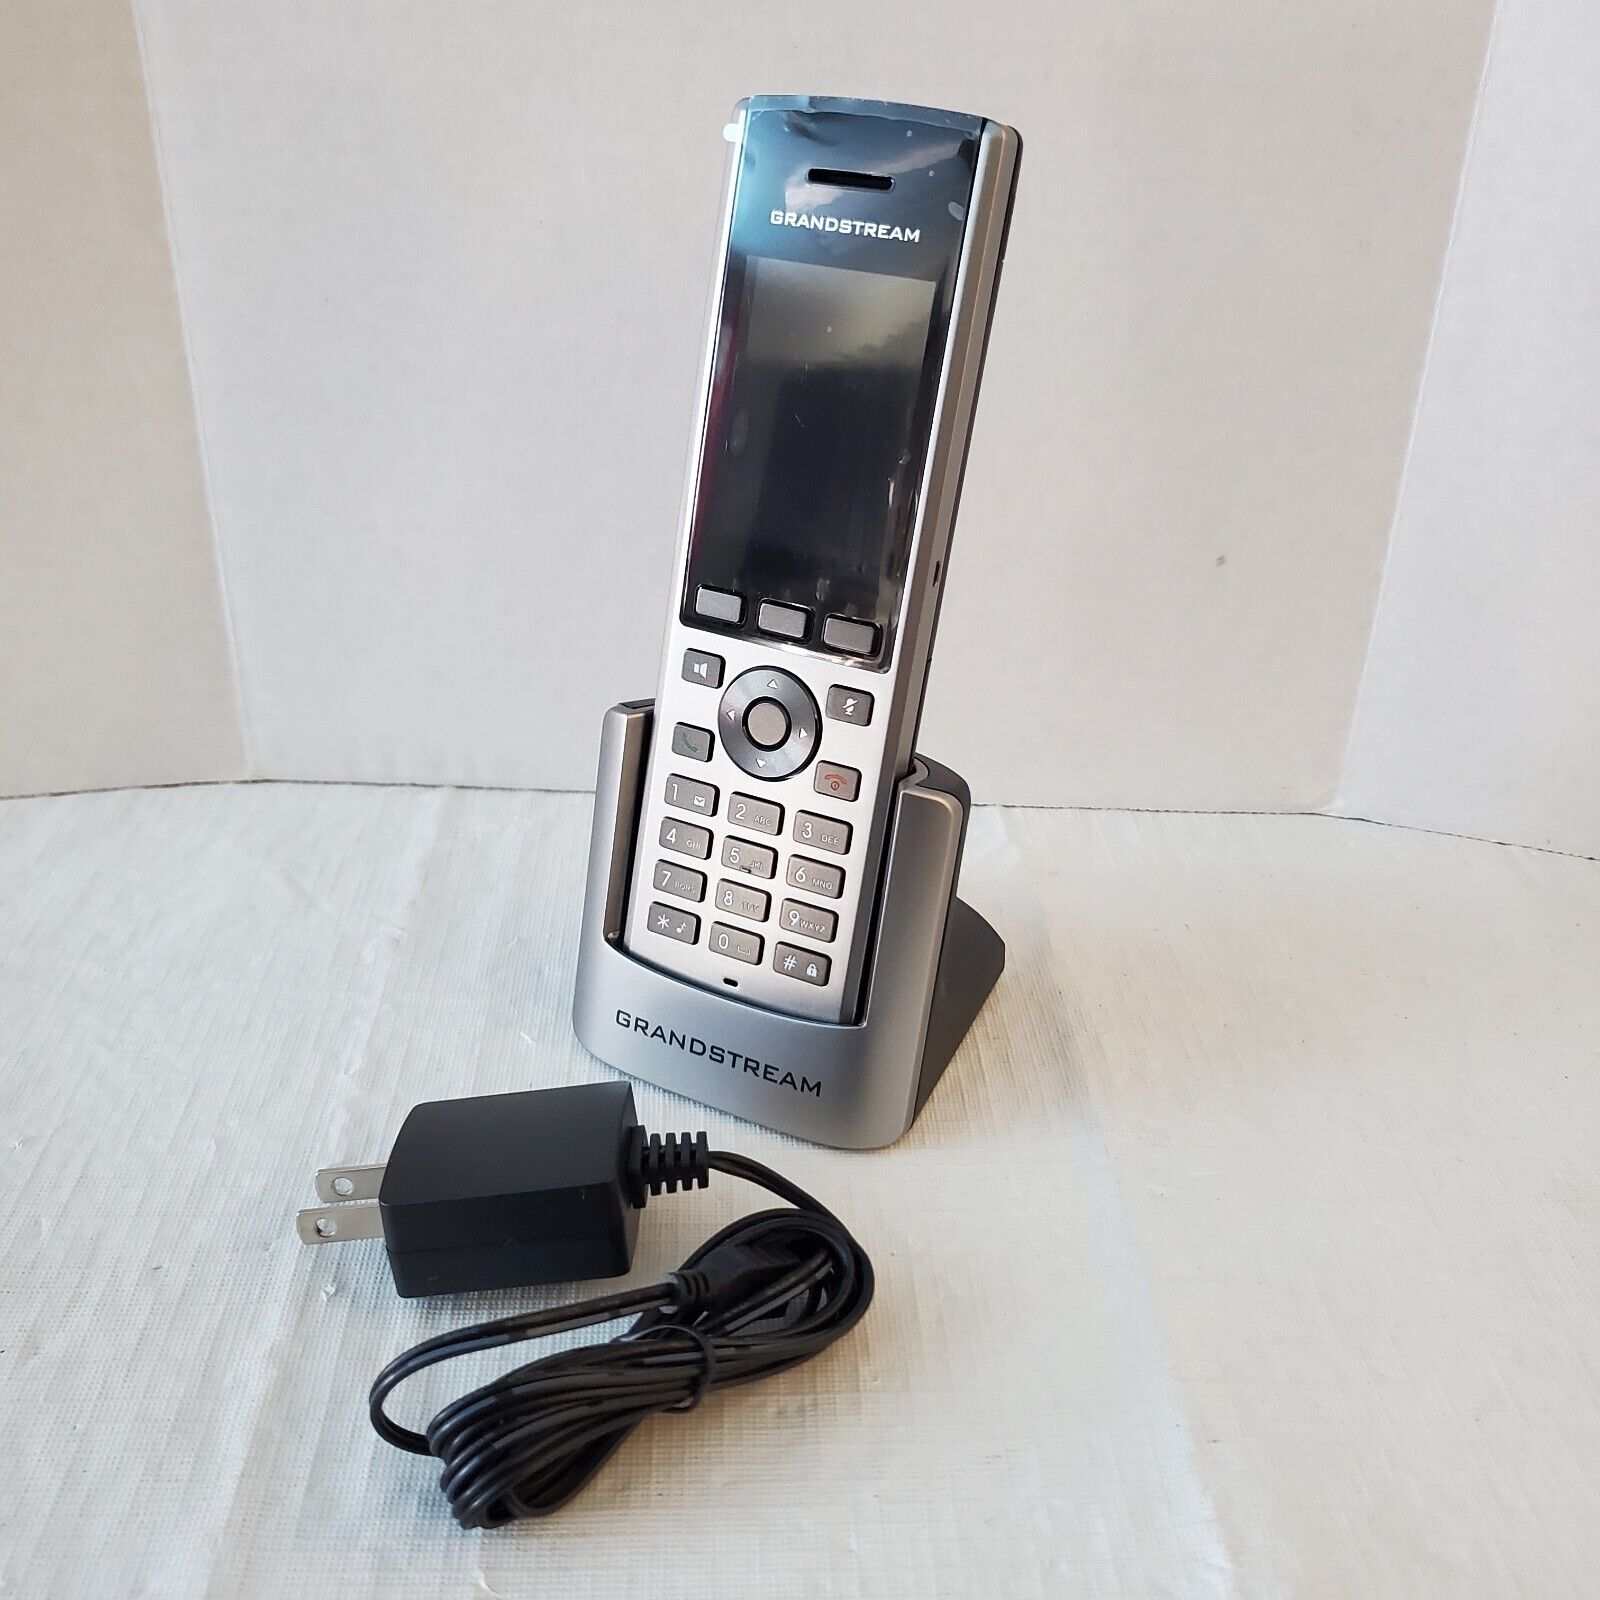 GRANDSTREAM Silver DP730 DECT Cordless HD VoIP Telephone Handset Never Used